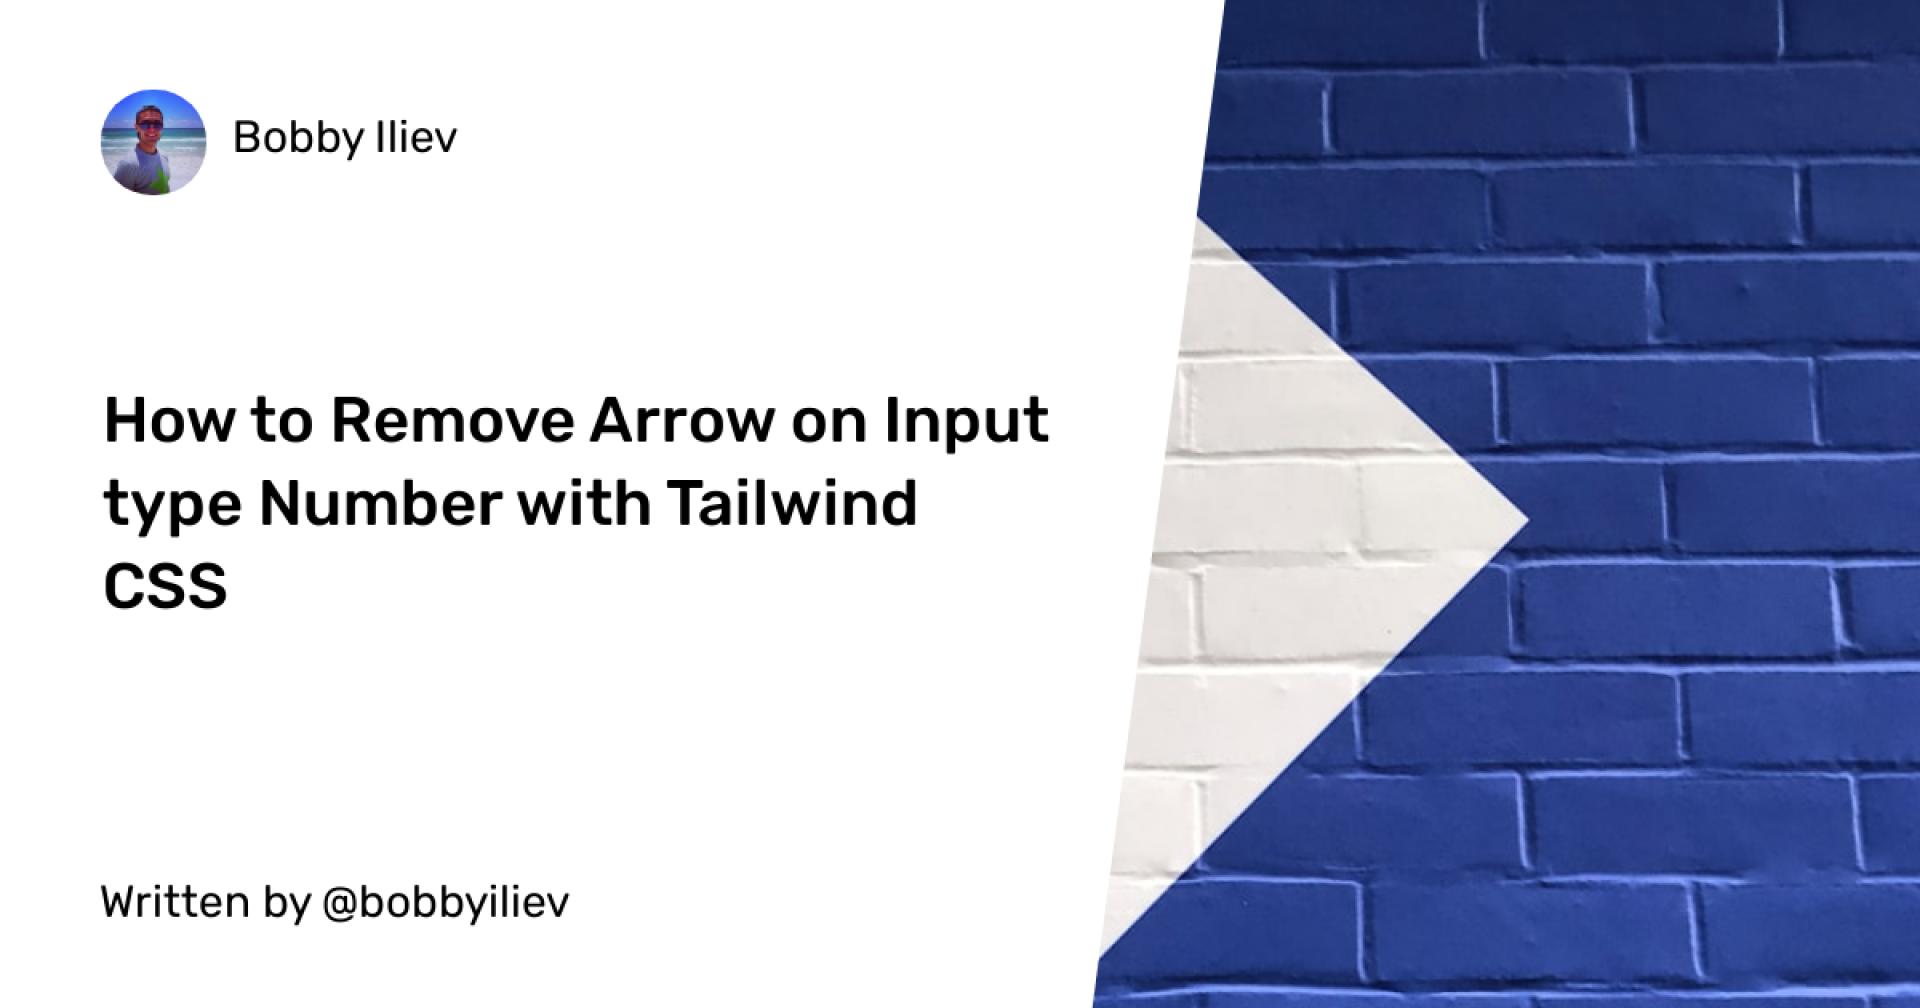 How to Remove Arrow on Input type Number with Tailwind CSS